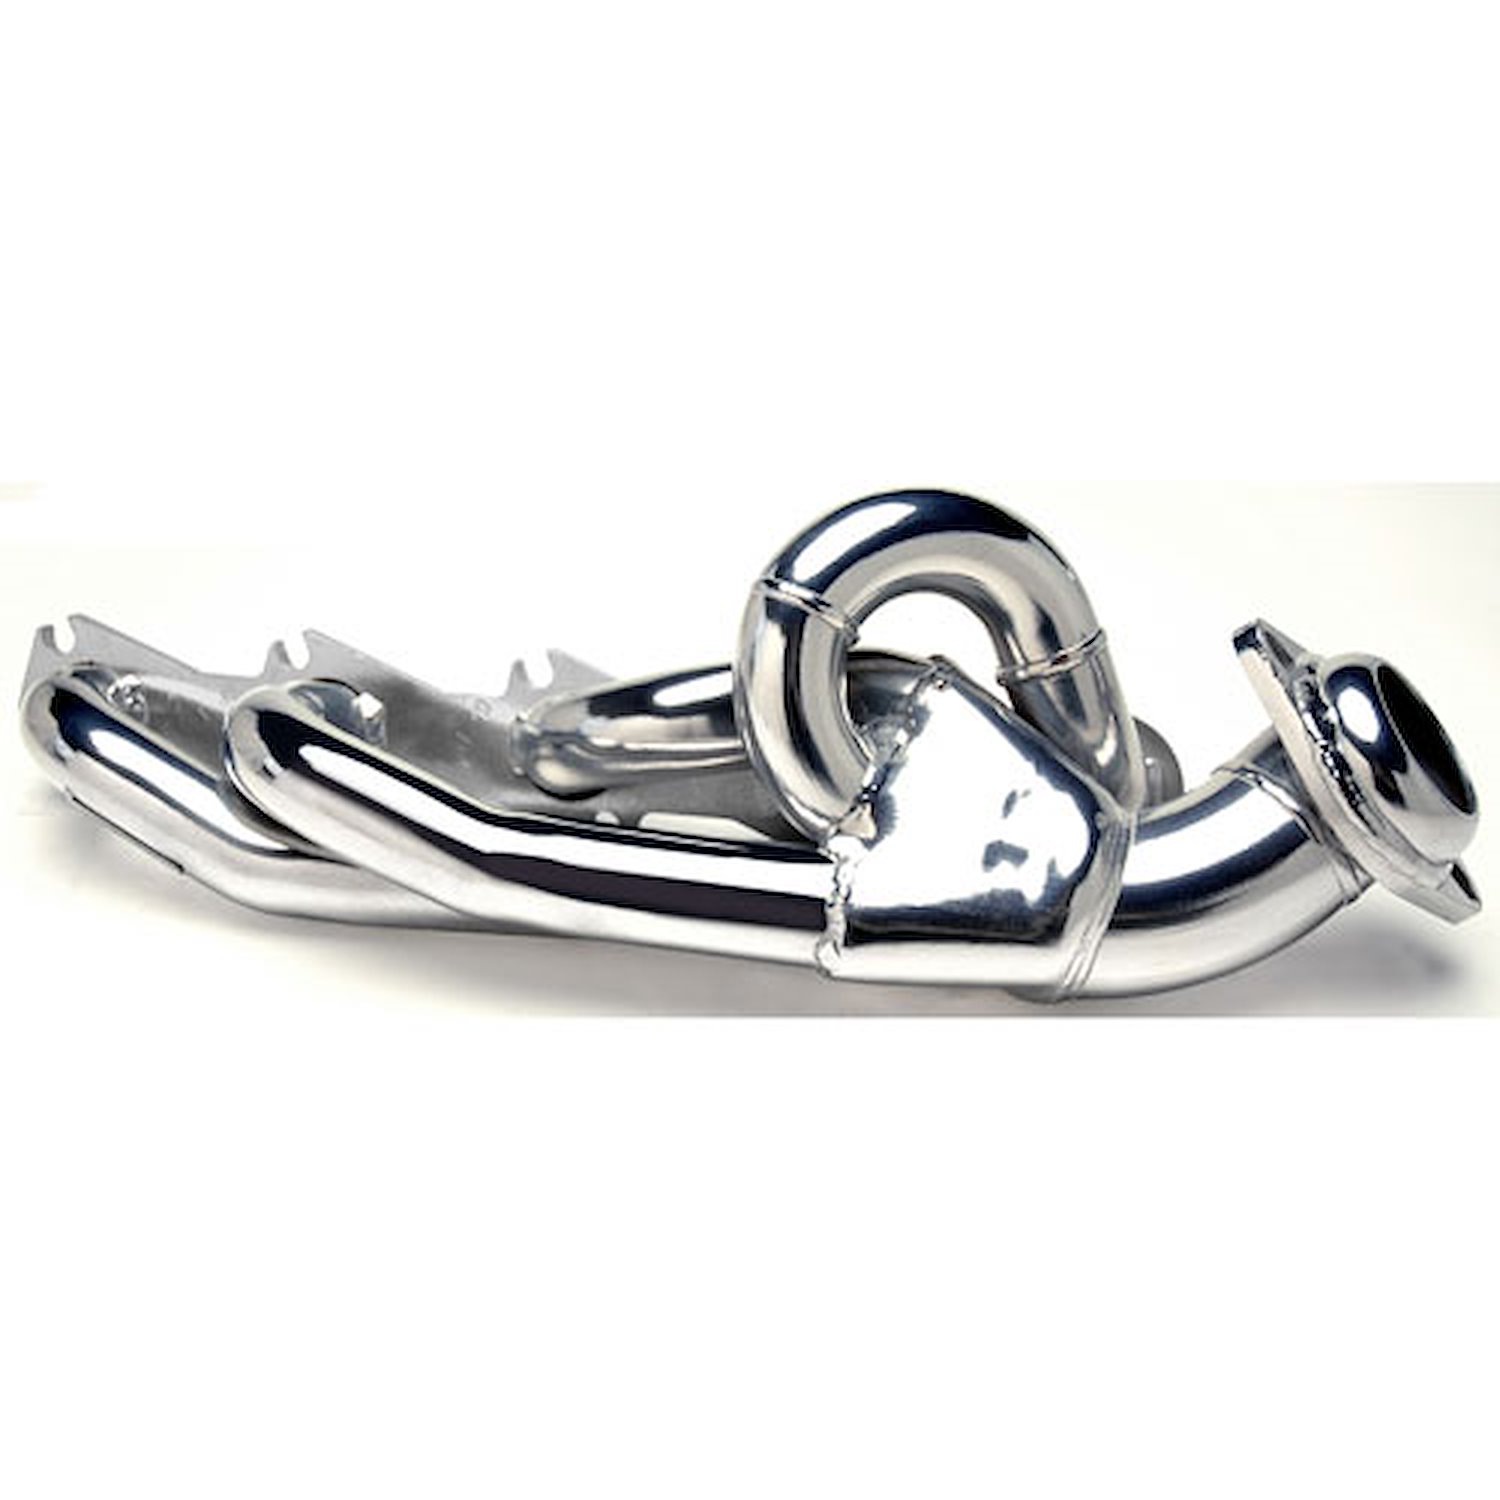 Ceramic Coated Stainless Steel Truck Headers 1999-05 Excursion